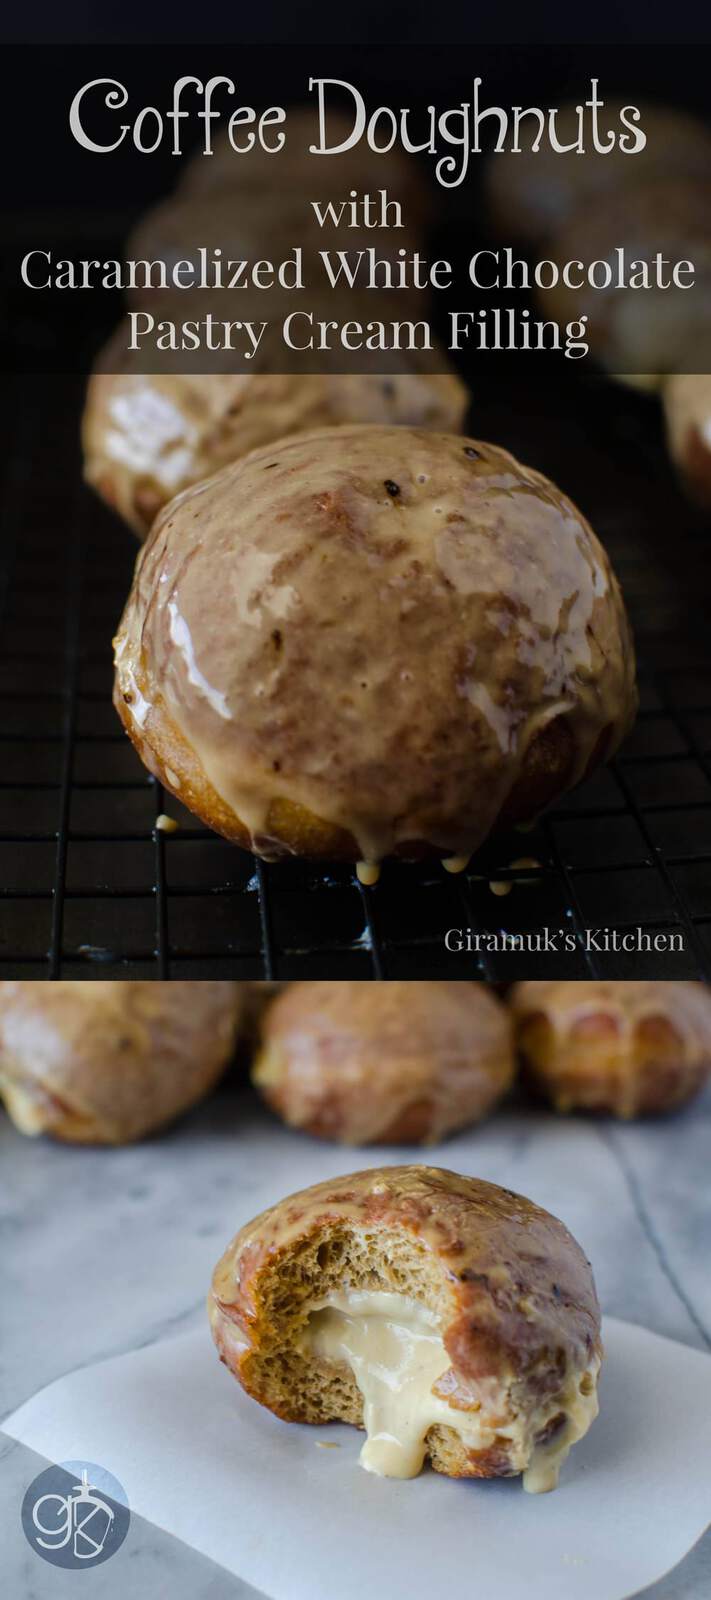  Glazed Coffee Doughnuts with Caramelized White Chocolate Pastry Cream Filling